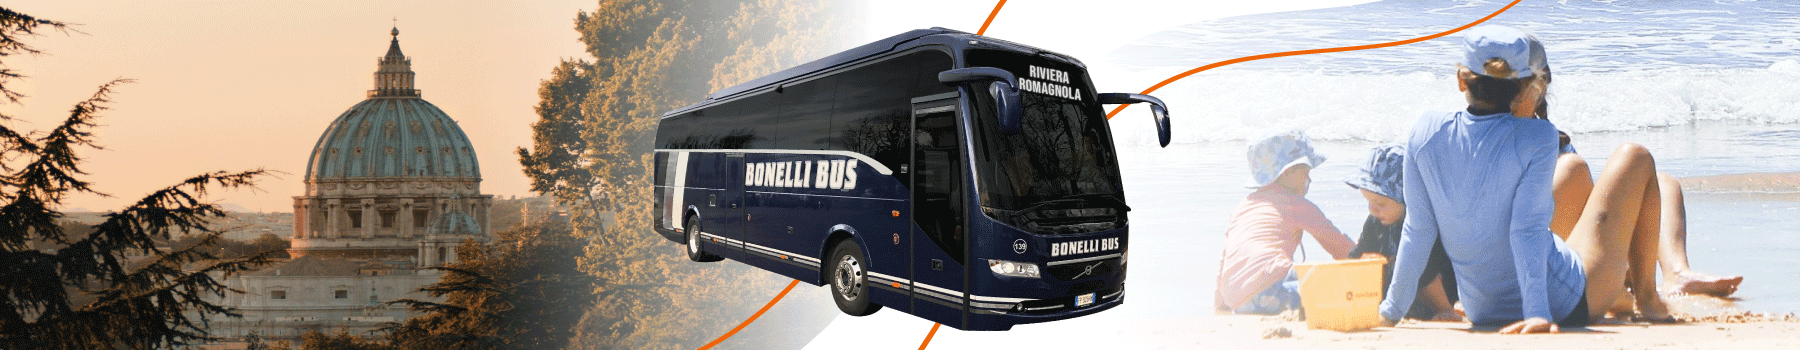 From Rome to Rimini by Bus - Bonelli Bus